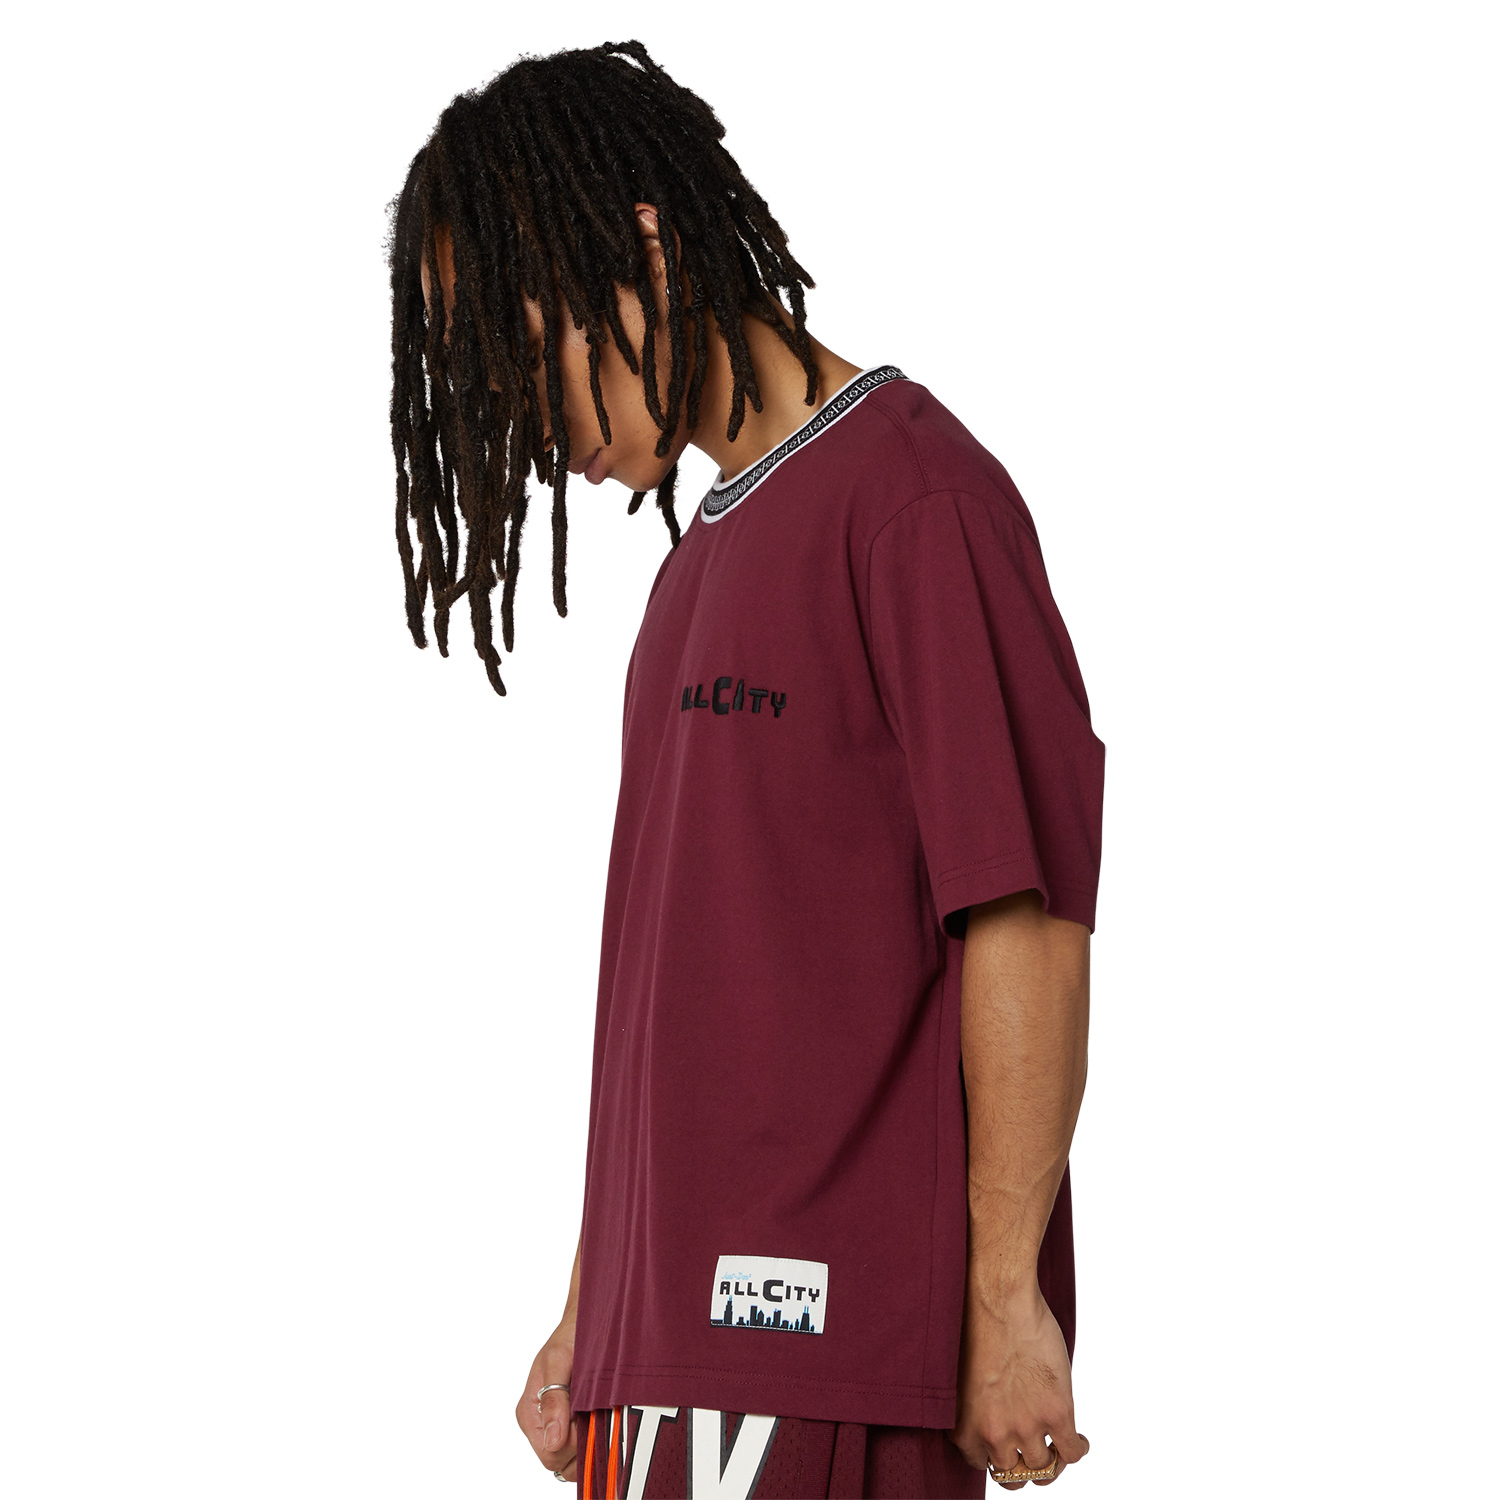 just-don-all-city-shirt-bordeaux-maroon-2